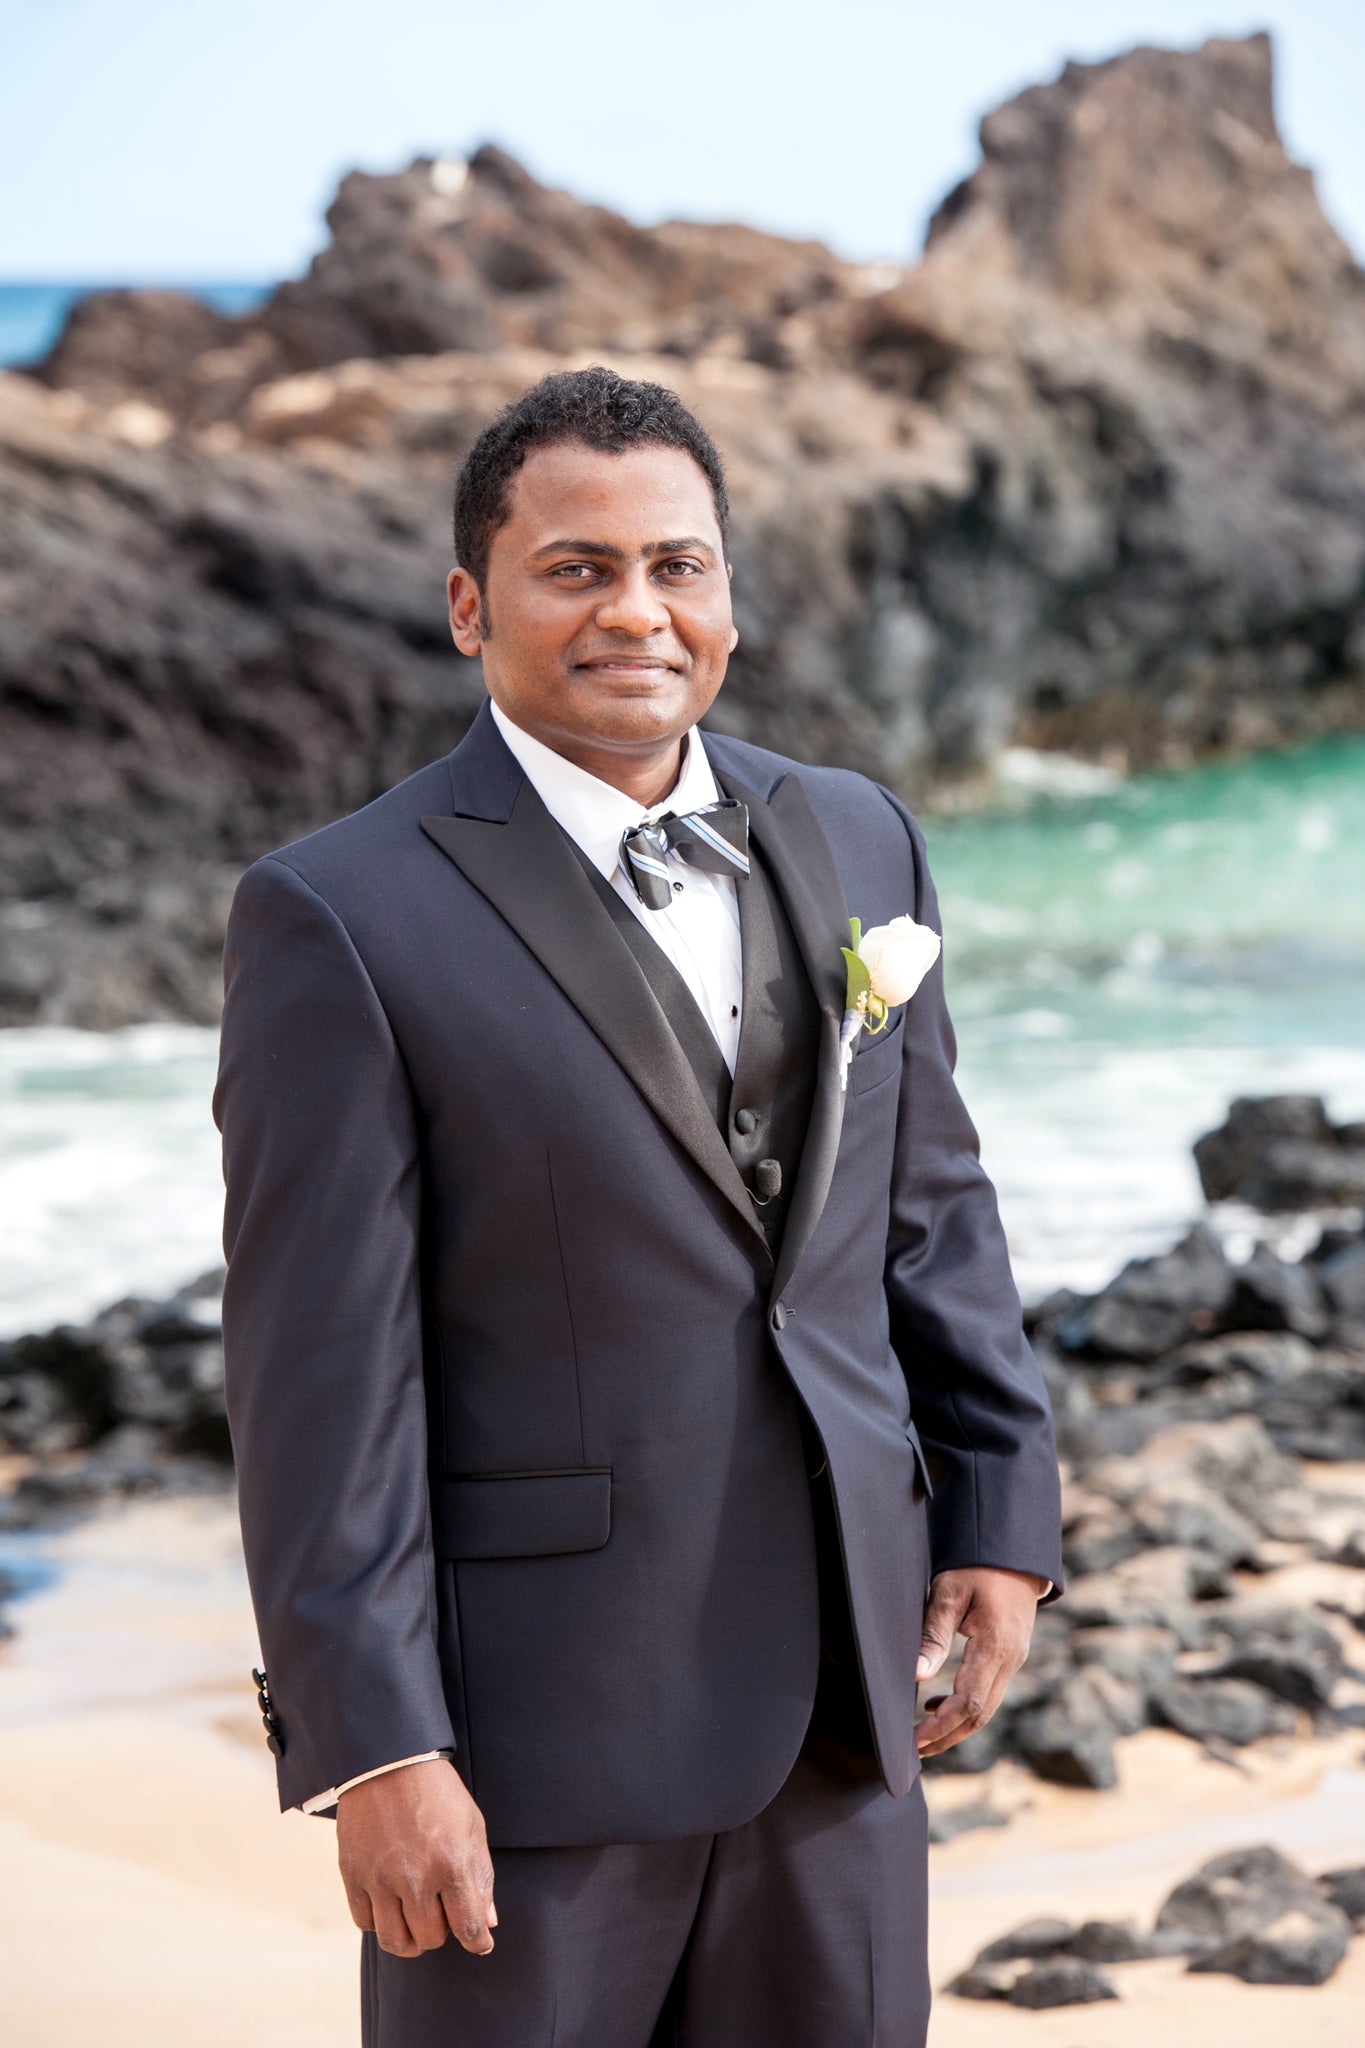 The Groom waits for his Bride on the Beach in Maui, Hawaii